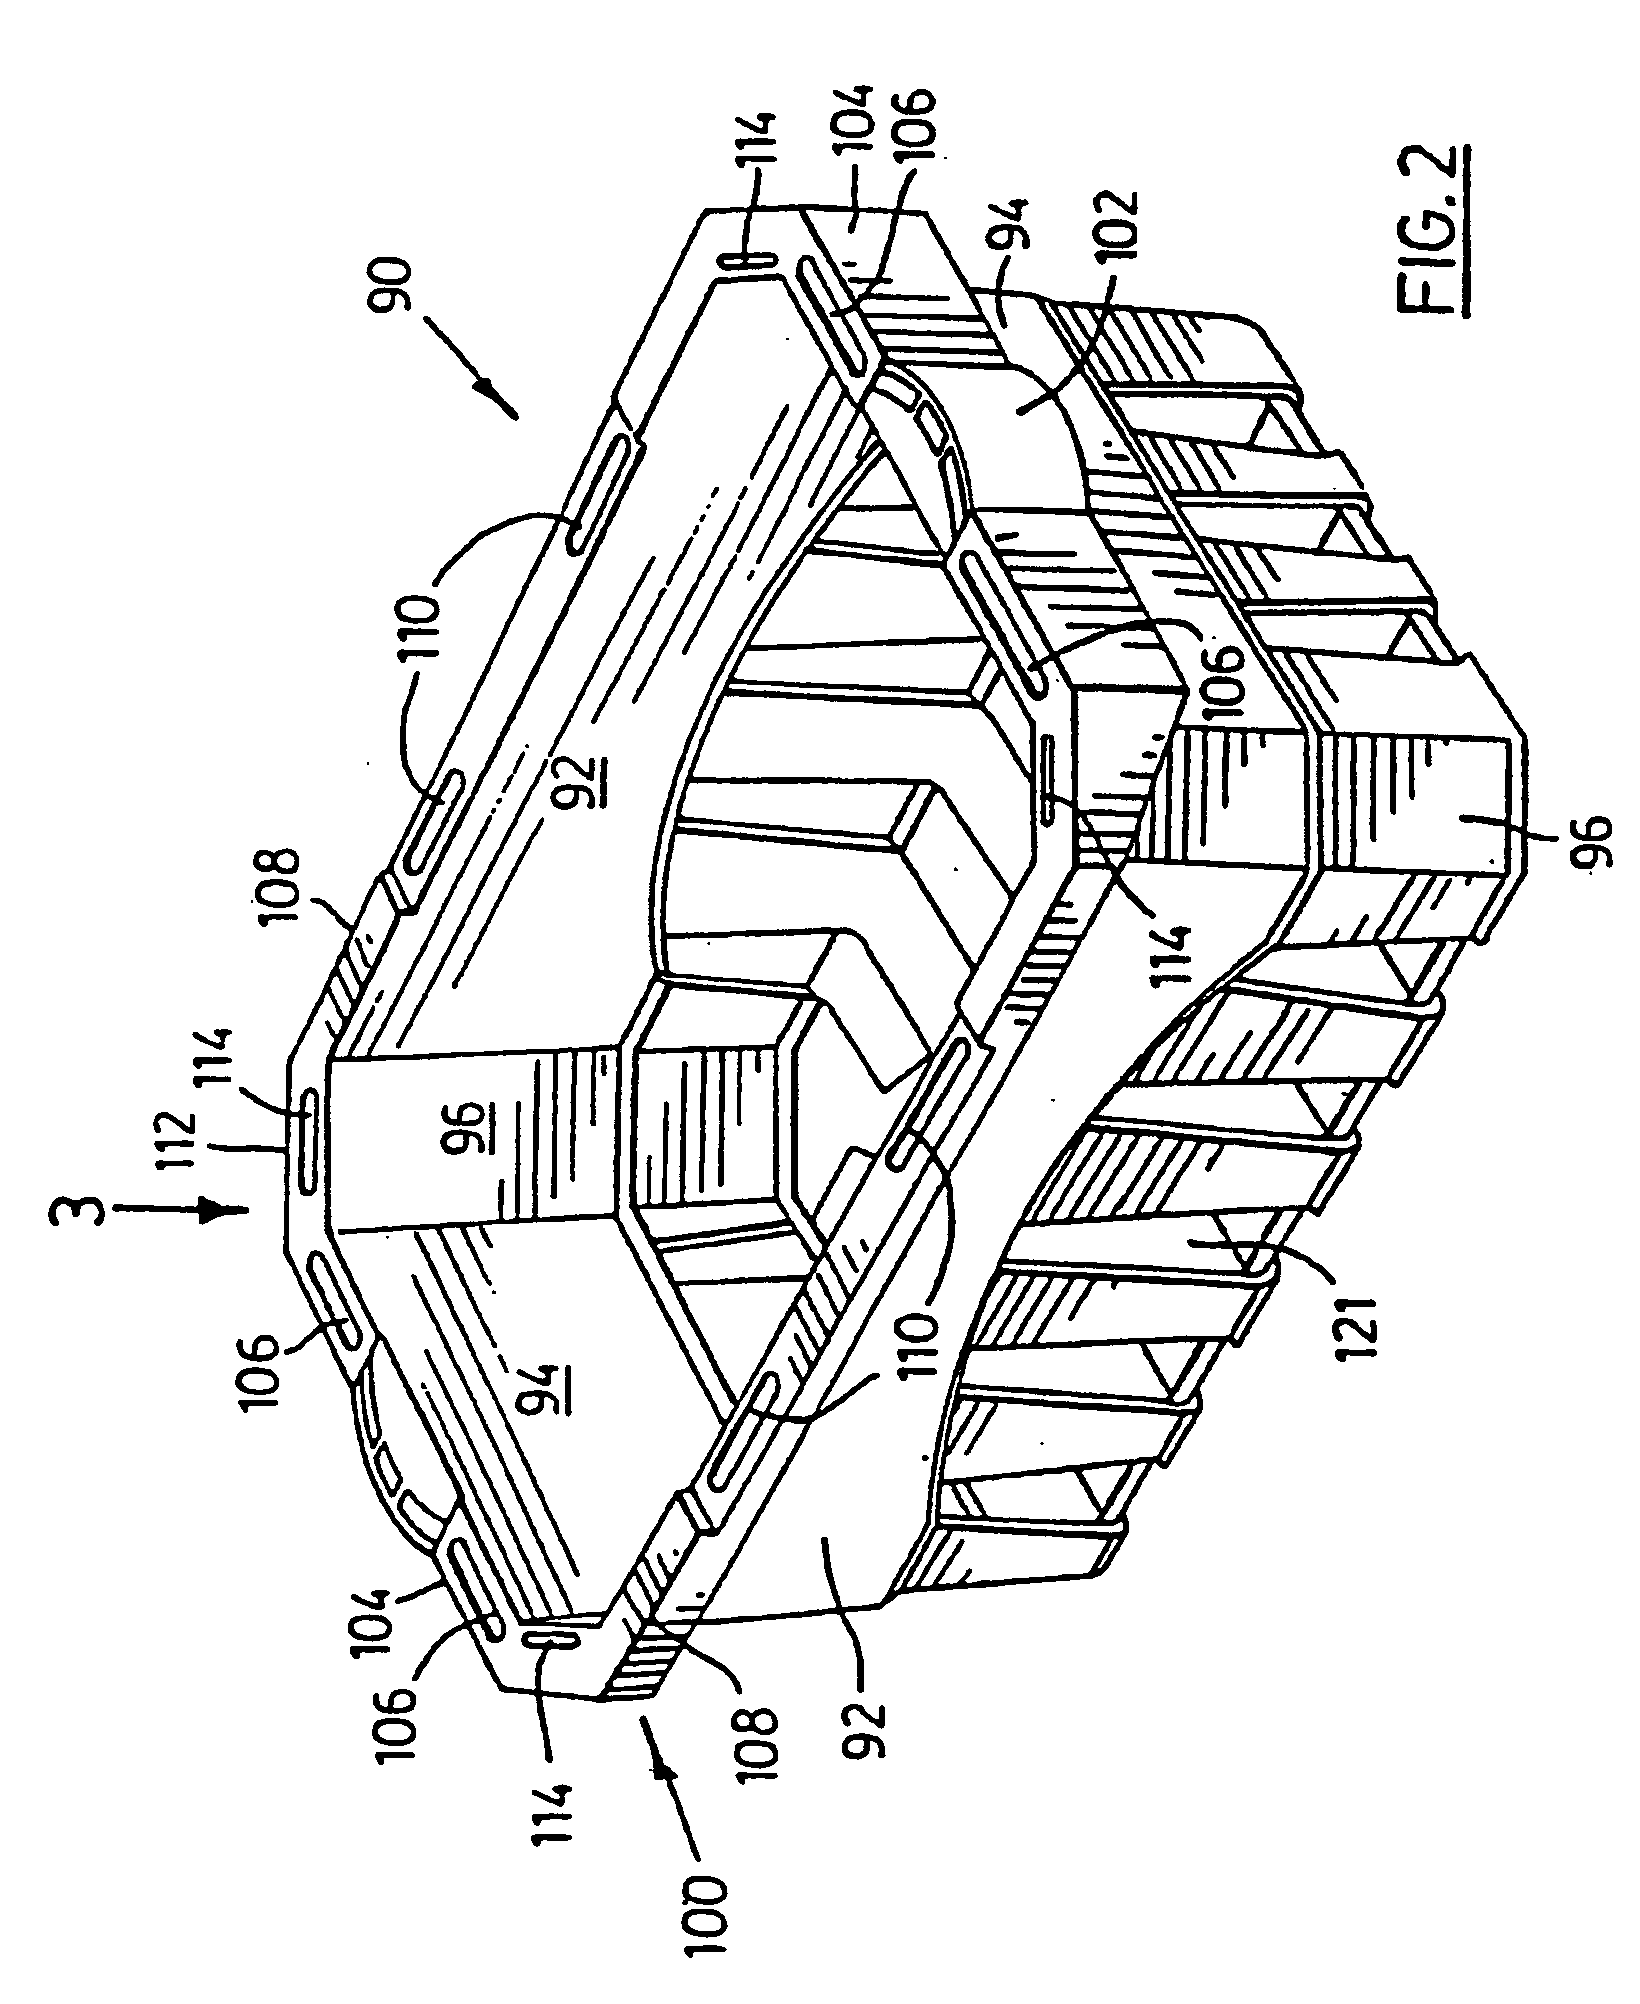 Container apparatus and related systems and methods